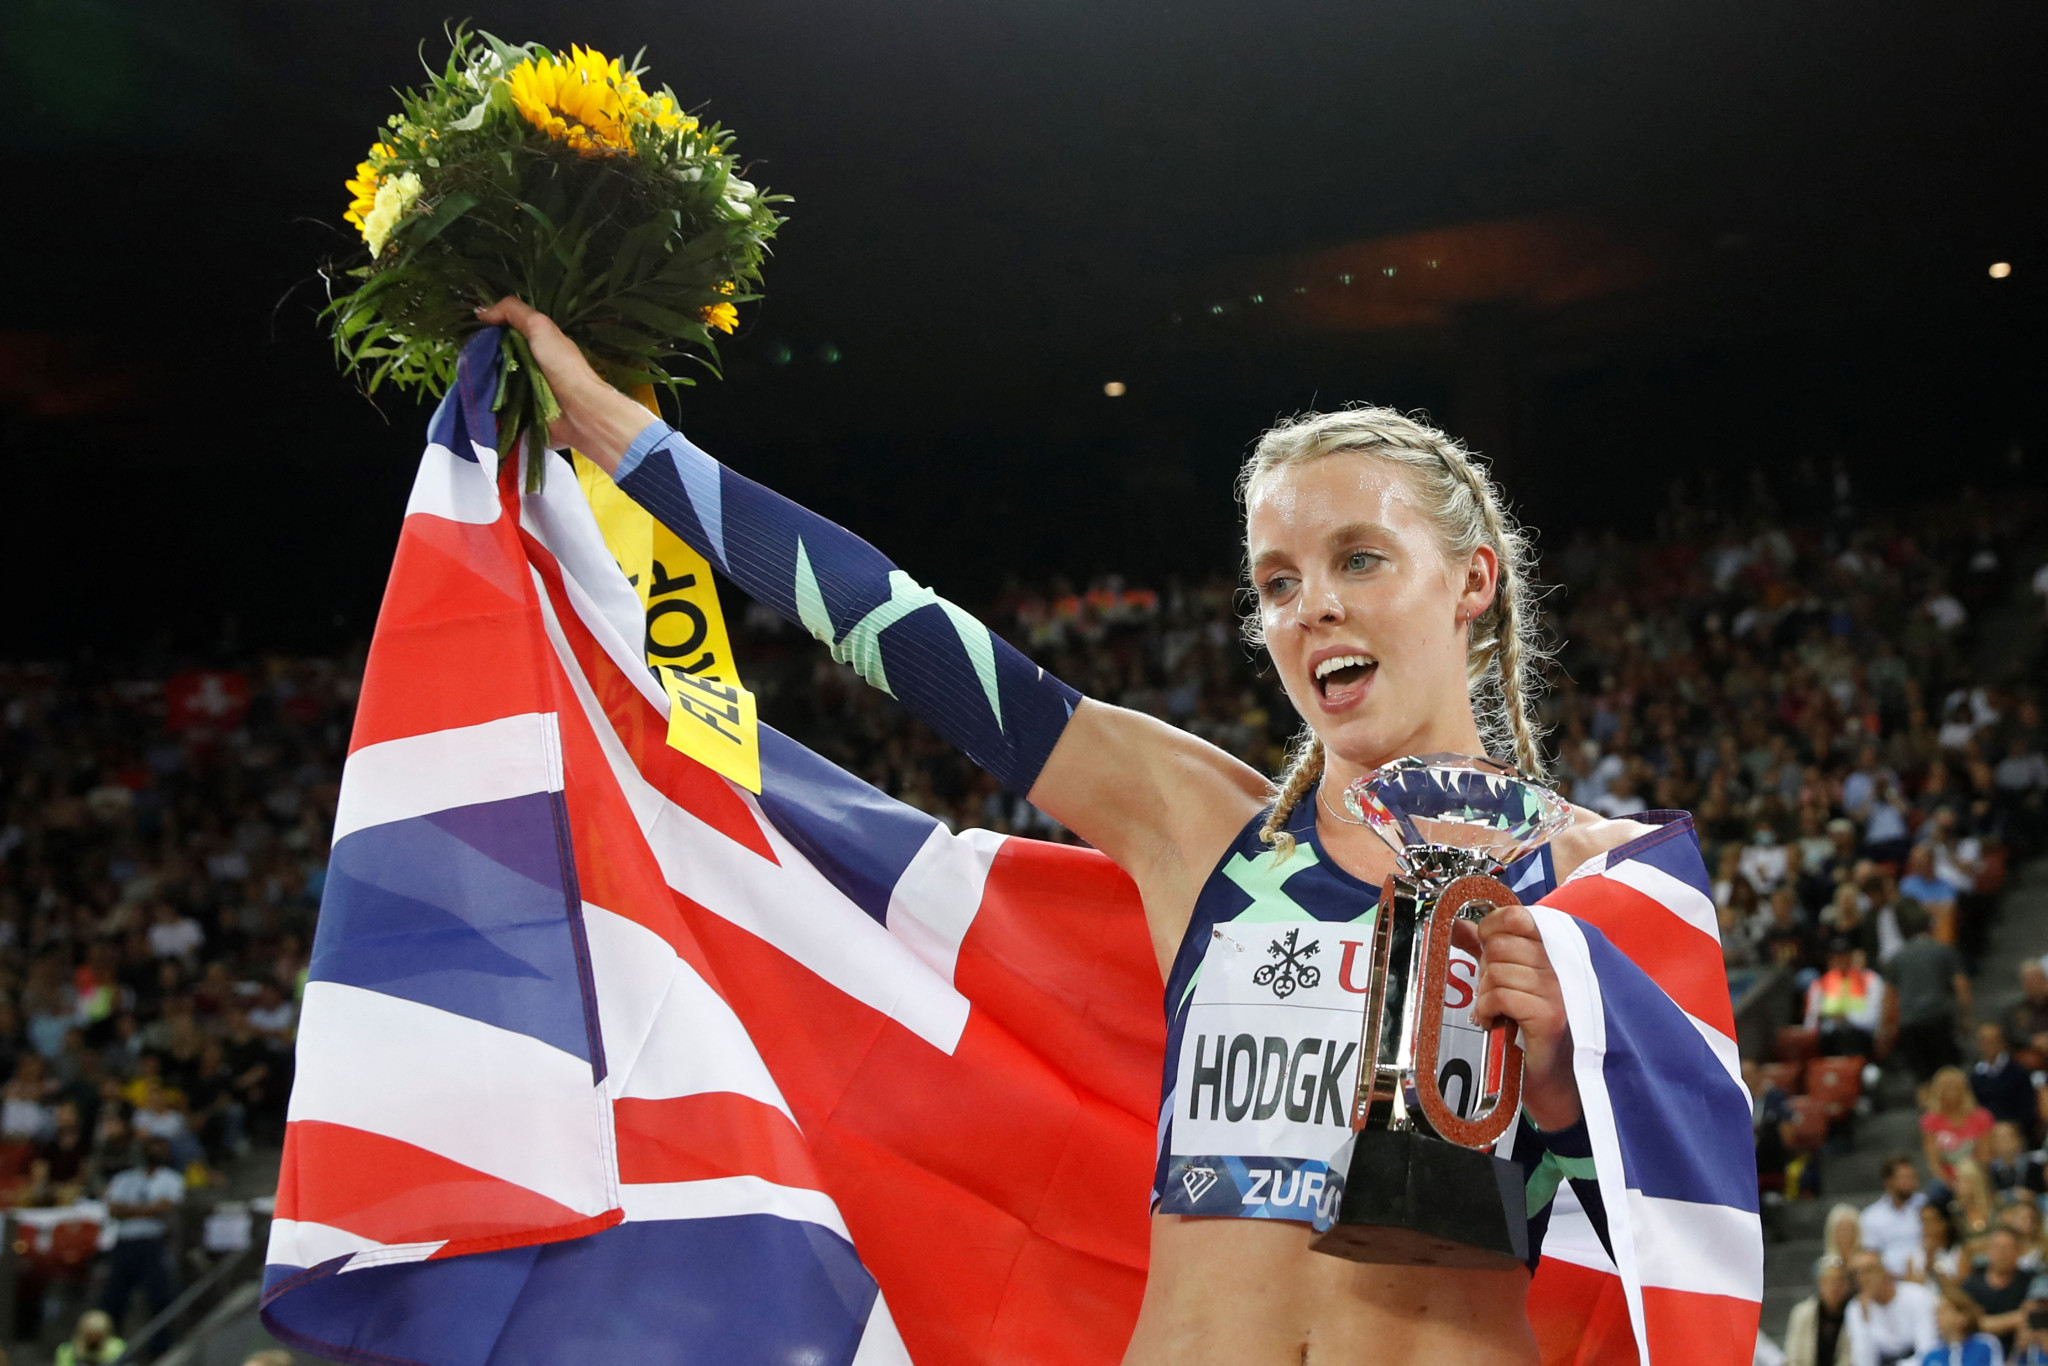 Keely Hodgkinson is one of several British Olympic medallists set to race in Birmingham ©Getty Images